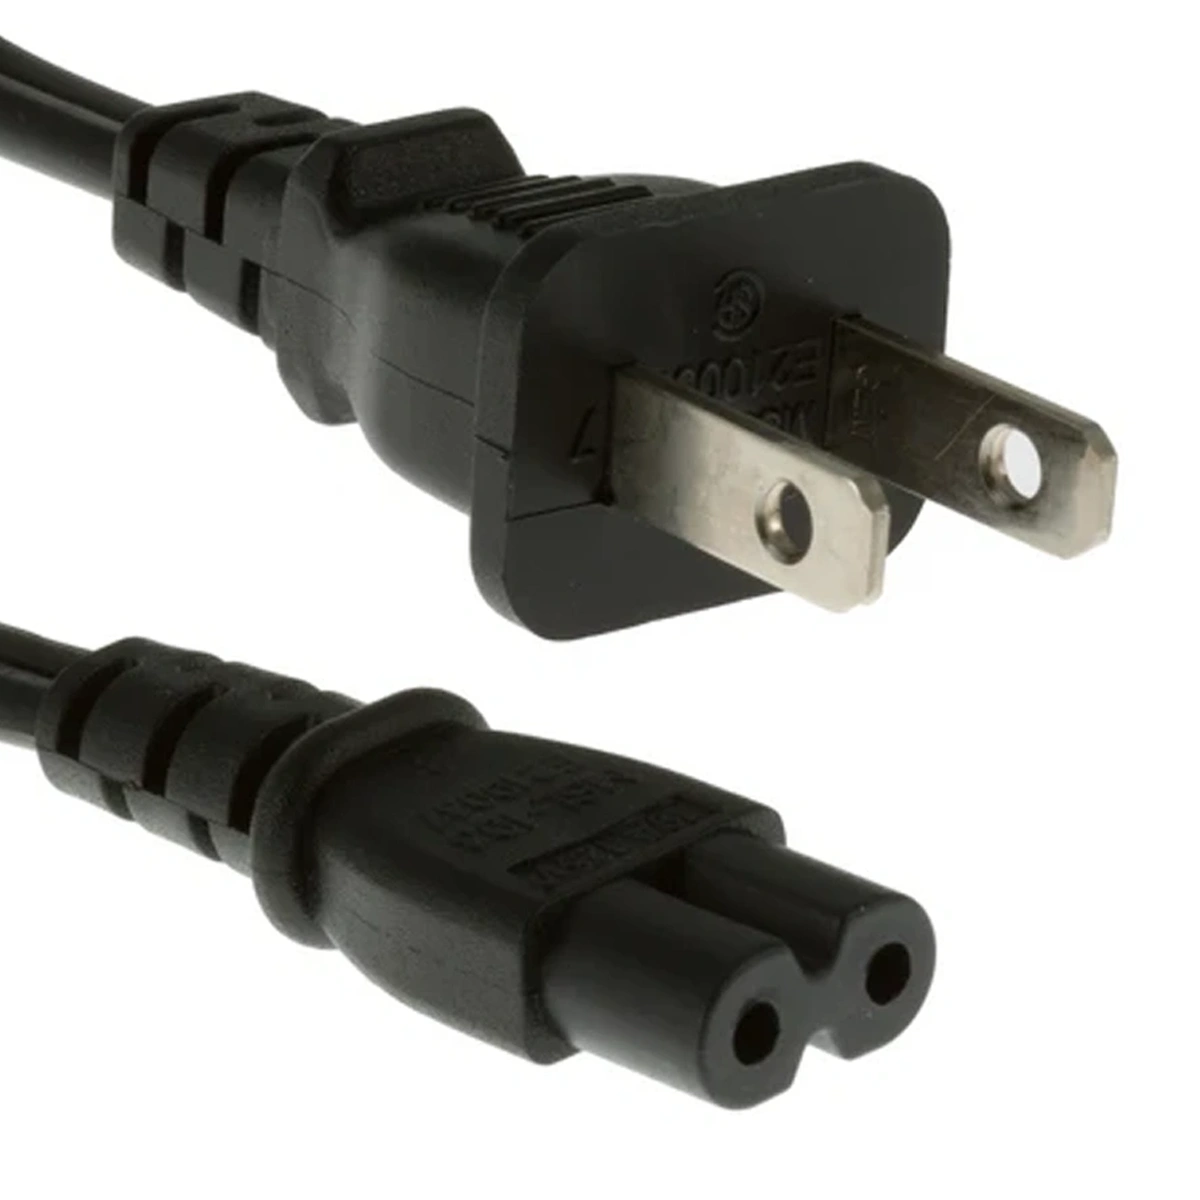 Figure 8 Power Cord For Home Printers